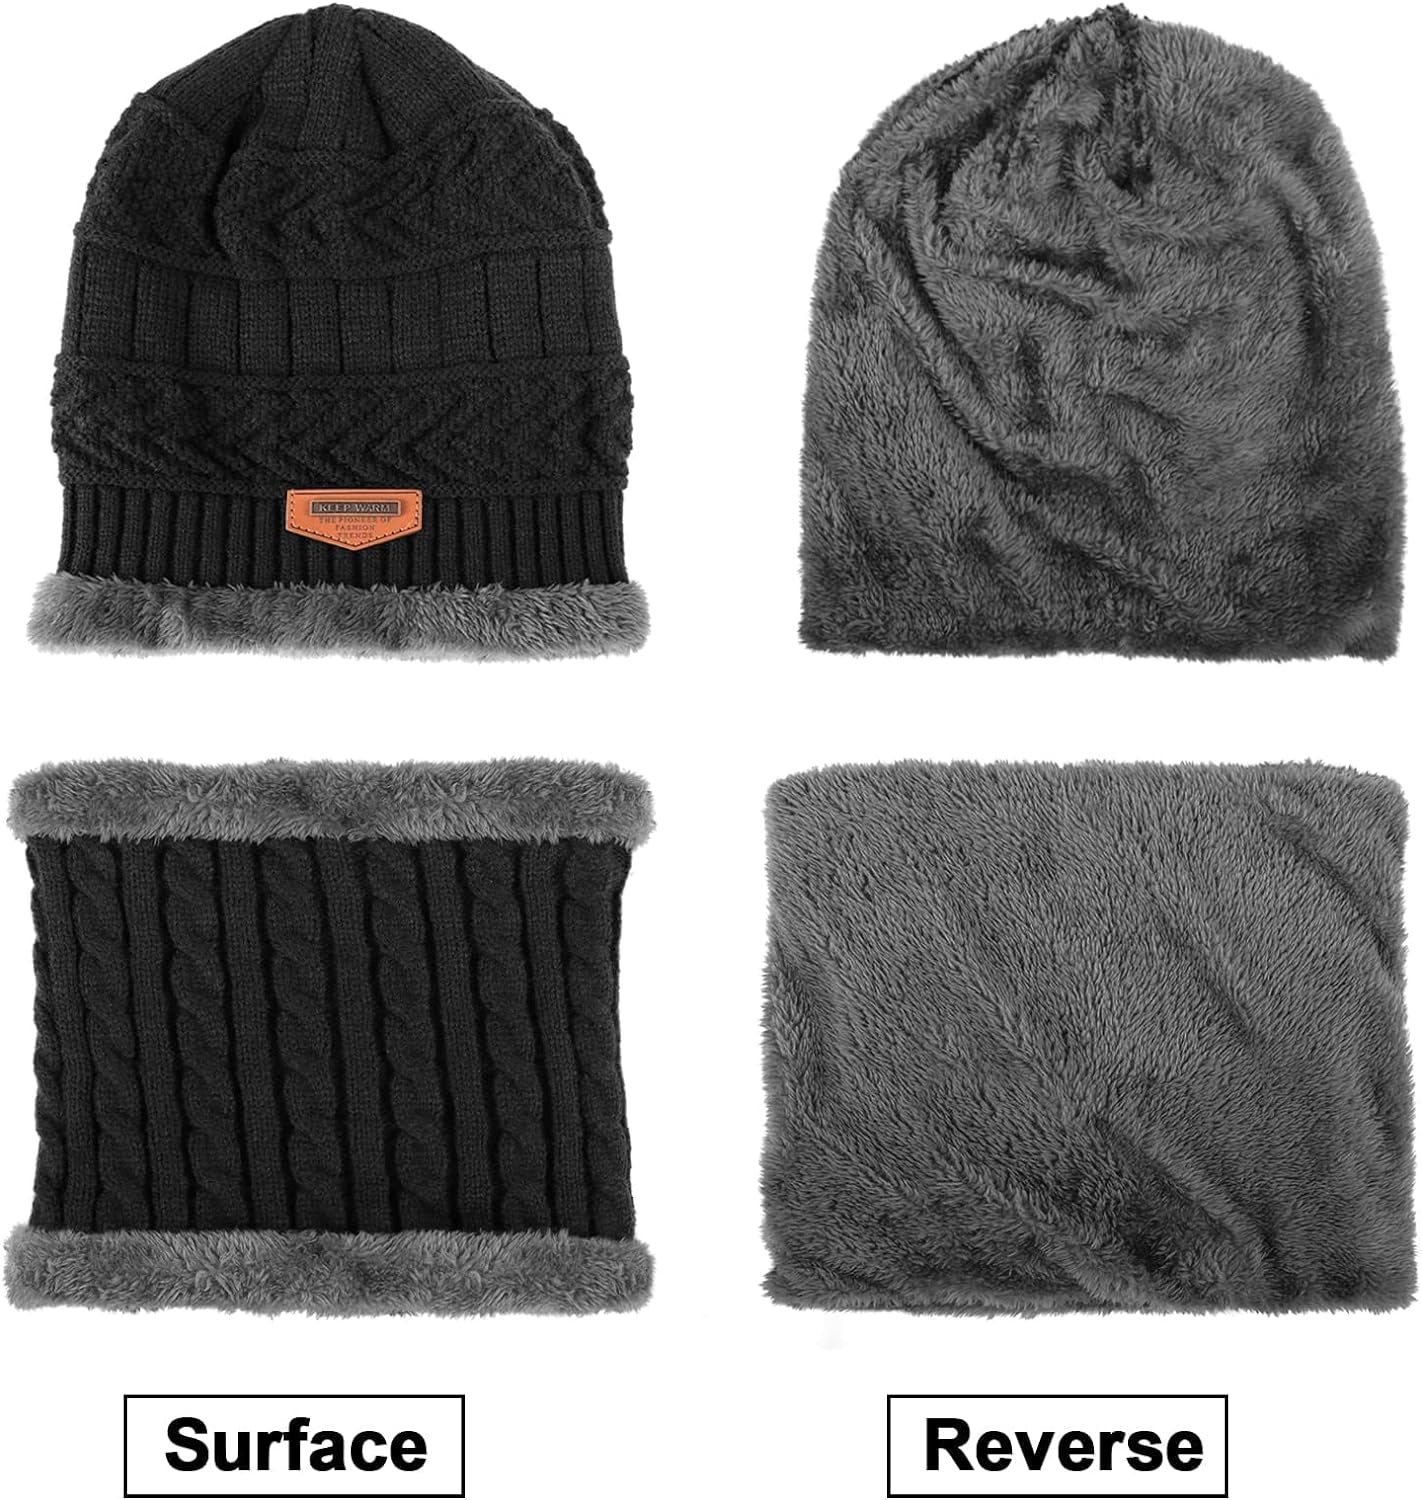 Winter Hat Scarf Gloves Set, Fleece Lined Slouchy Beanie Snow Knit Skull Cap Touchscreen Mittens Circle Scarves for Men Women